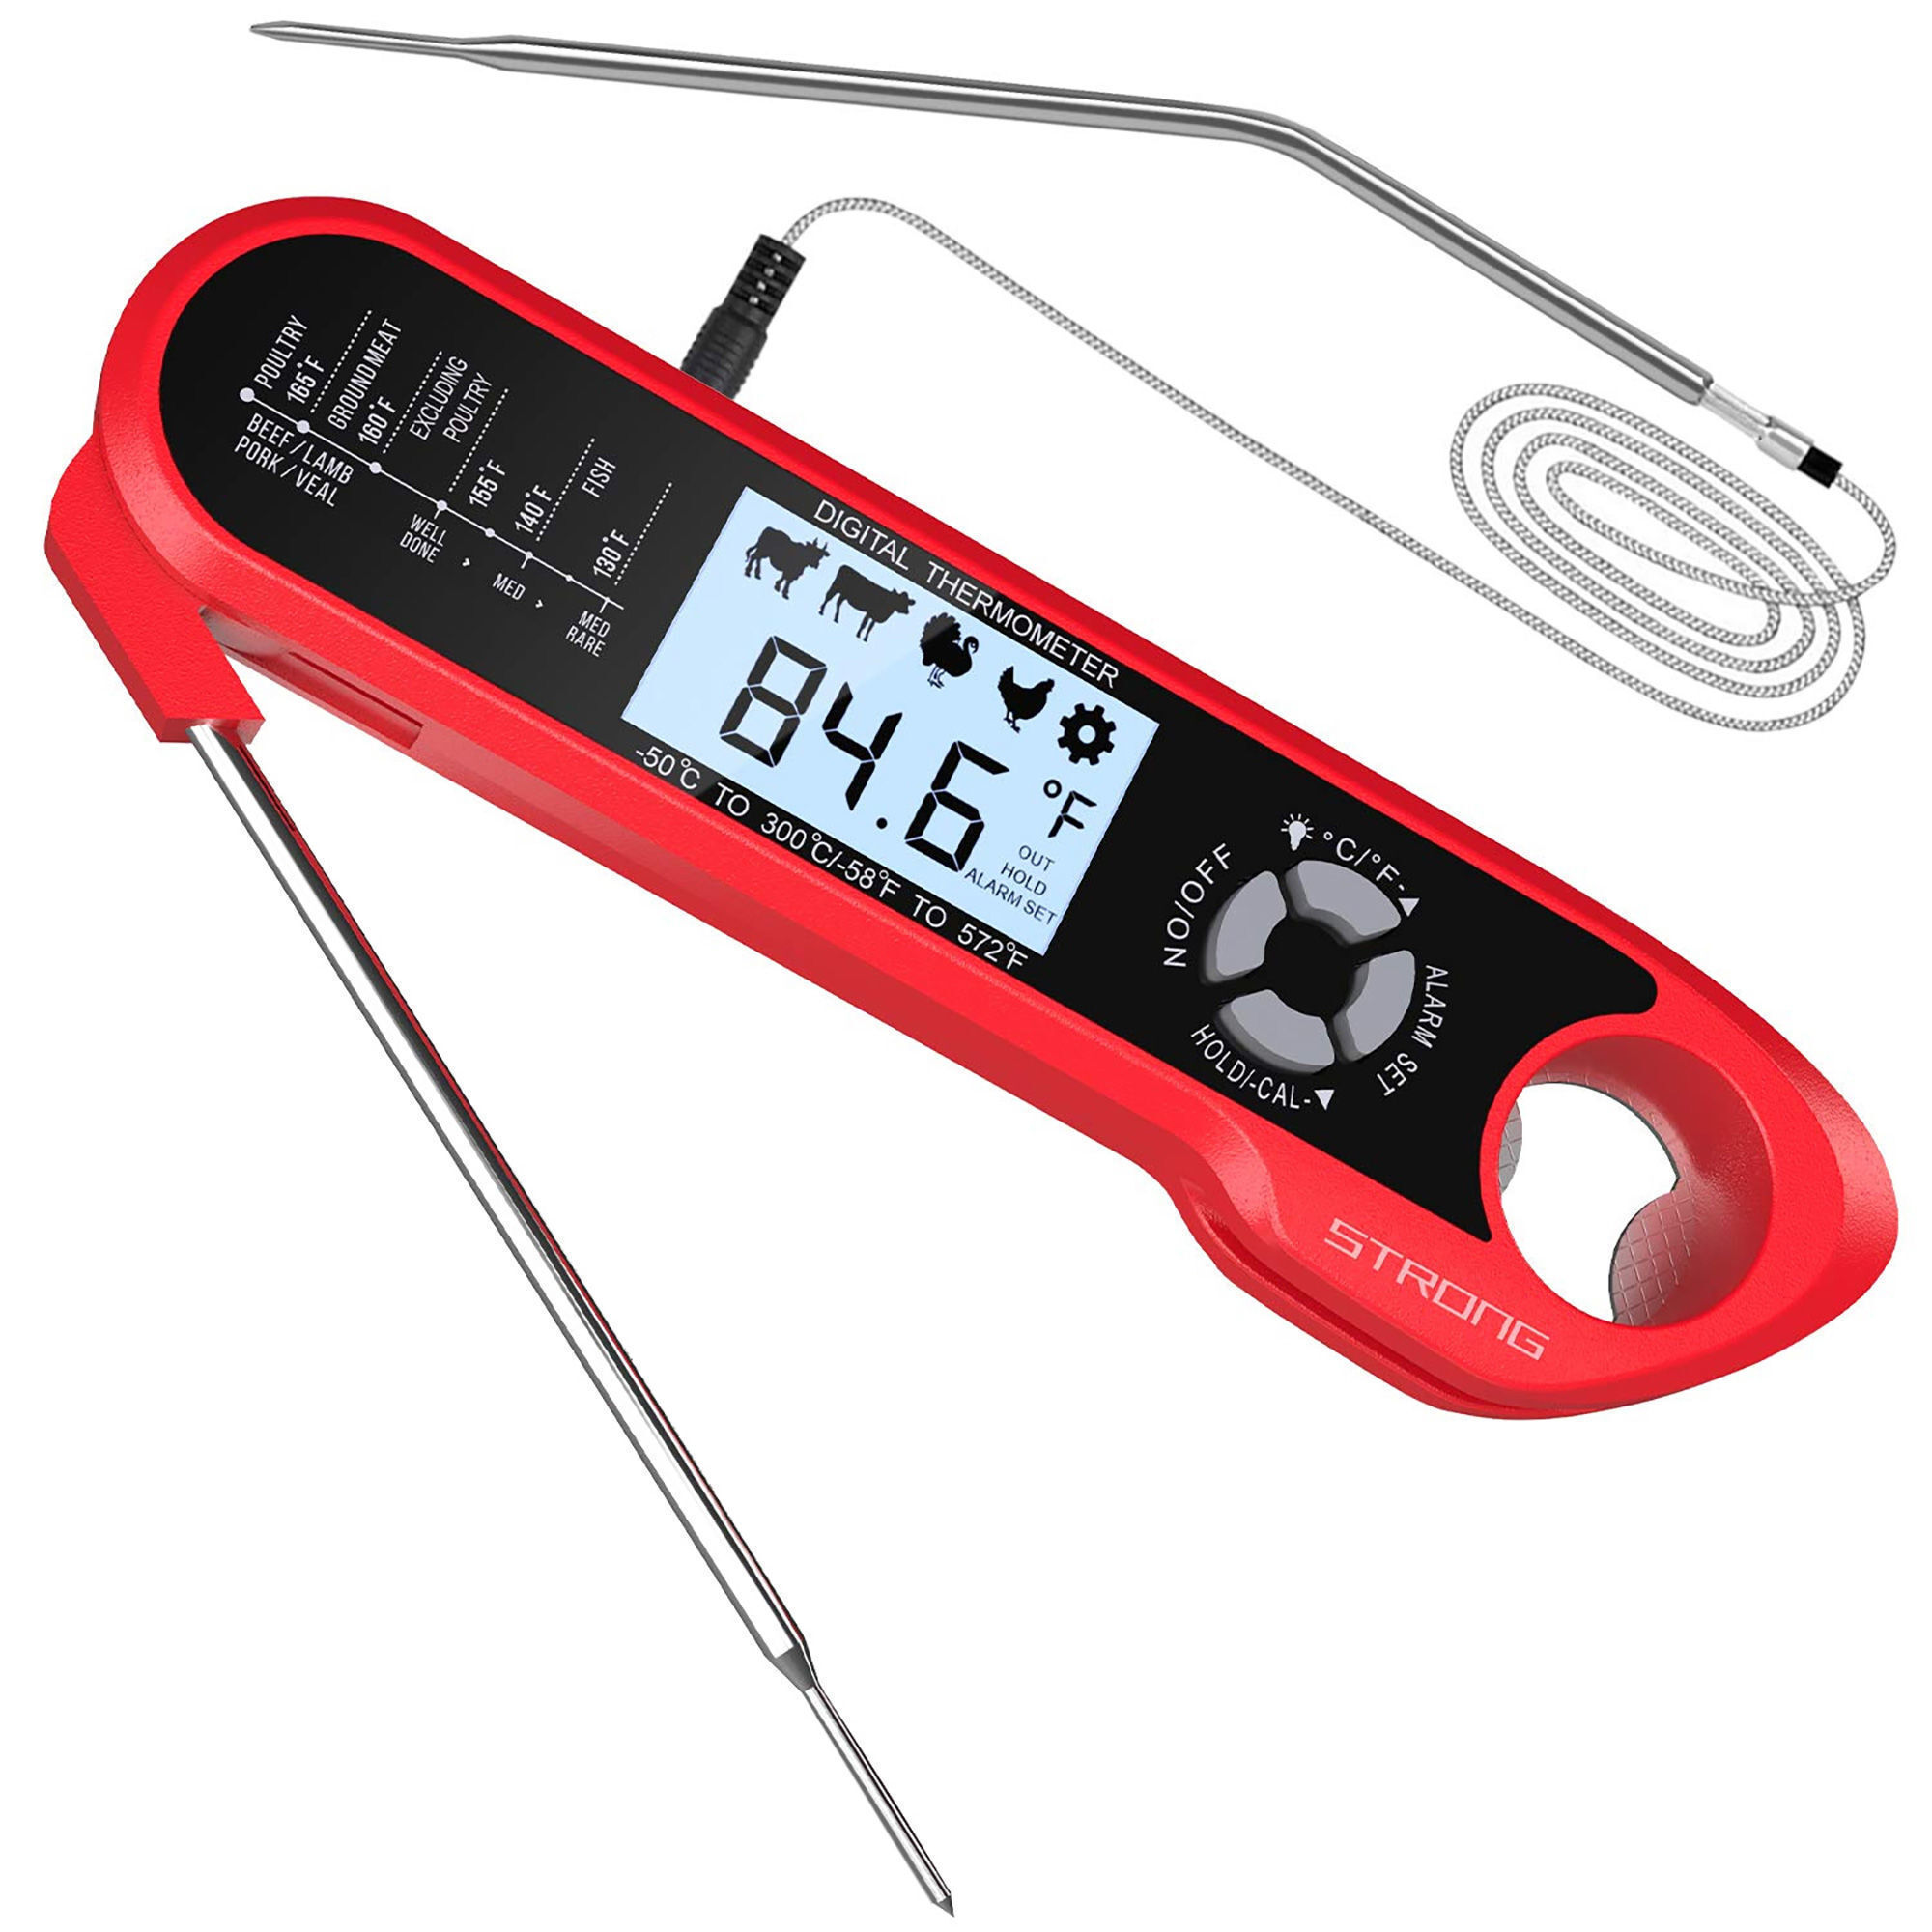 Digital Meat Thermometer Instant Read (2-4 seconds), Best Waterproof  Cooking Thermometer with Backlight & Probe, Meat Thermometers for Grilling